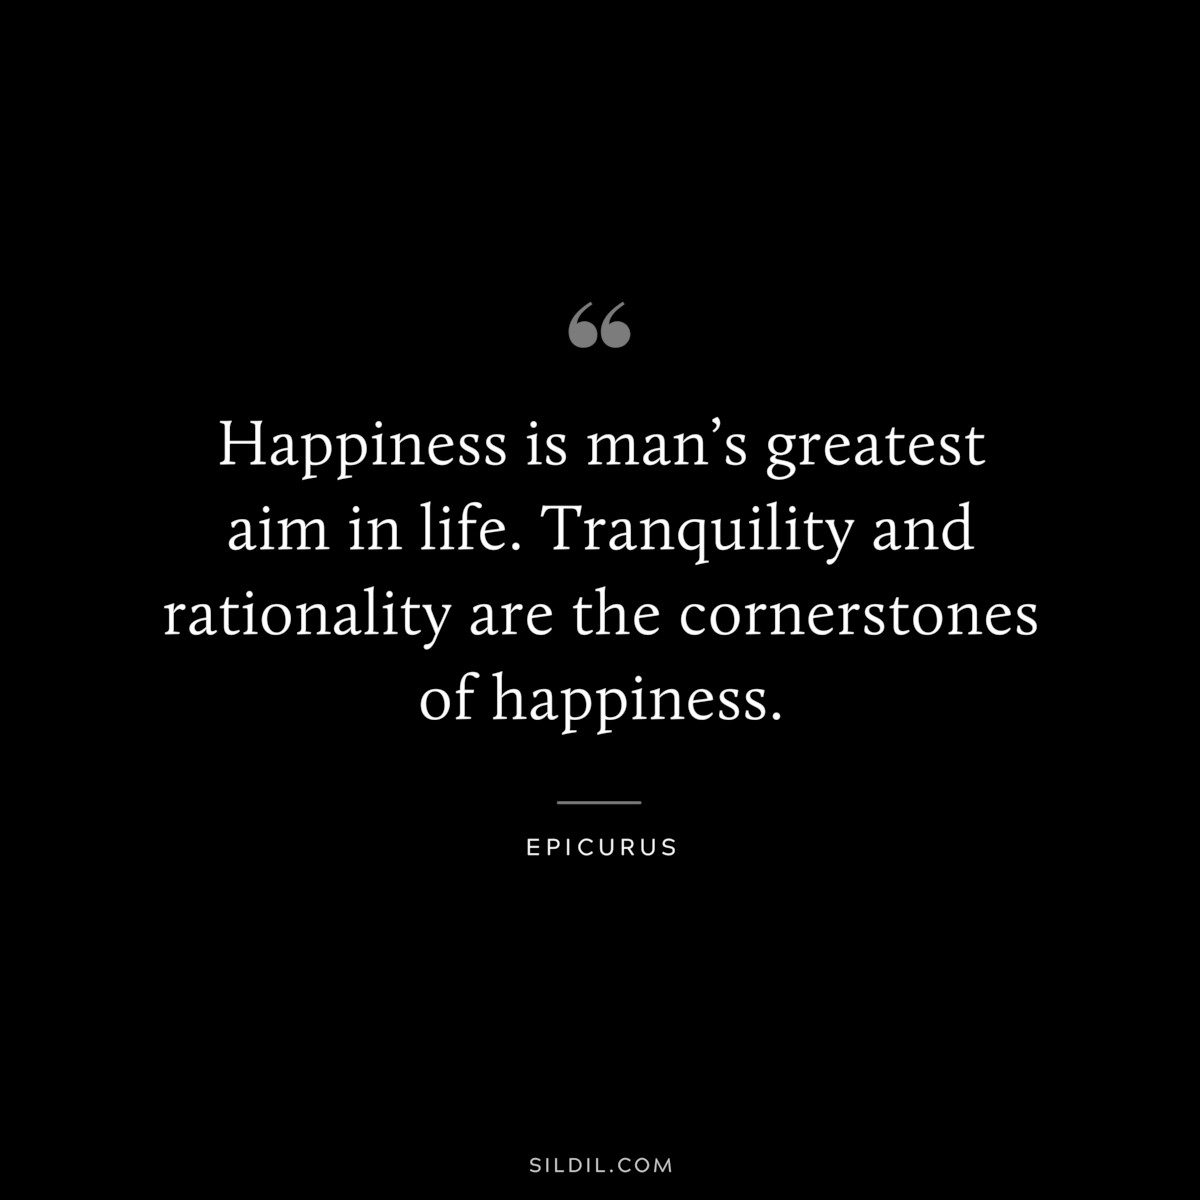 Happiness is man’s greatest aim in life. Tranquility and rationality are the cornerstones of happiness. — Epicurus